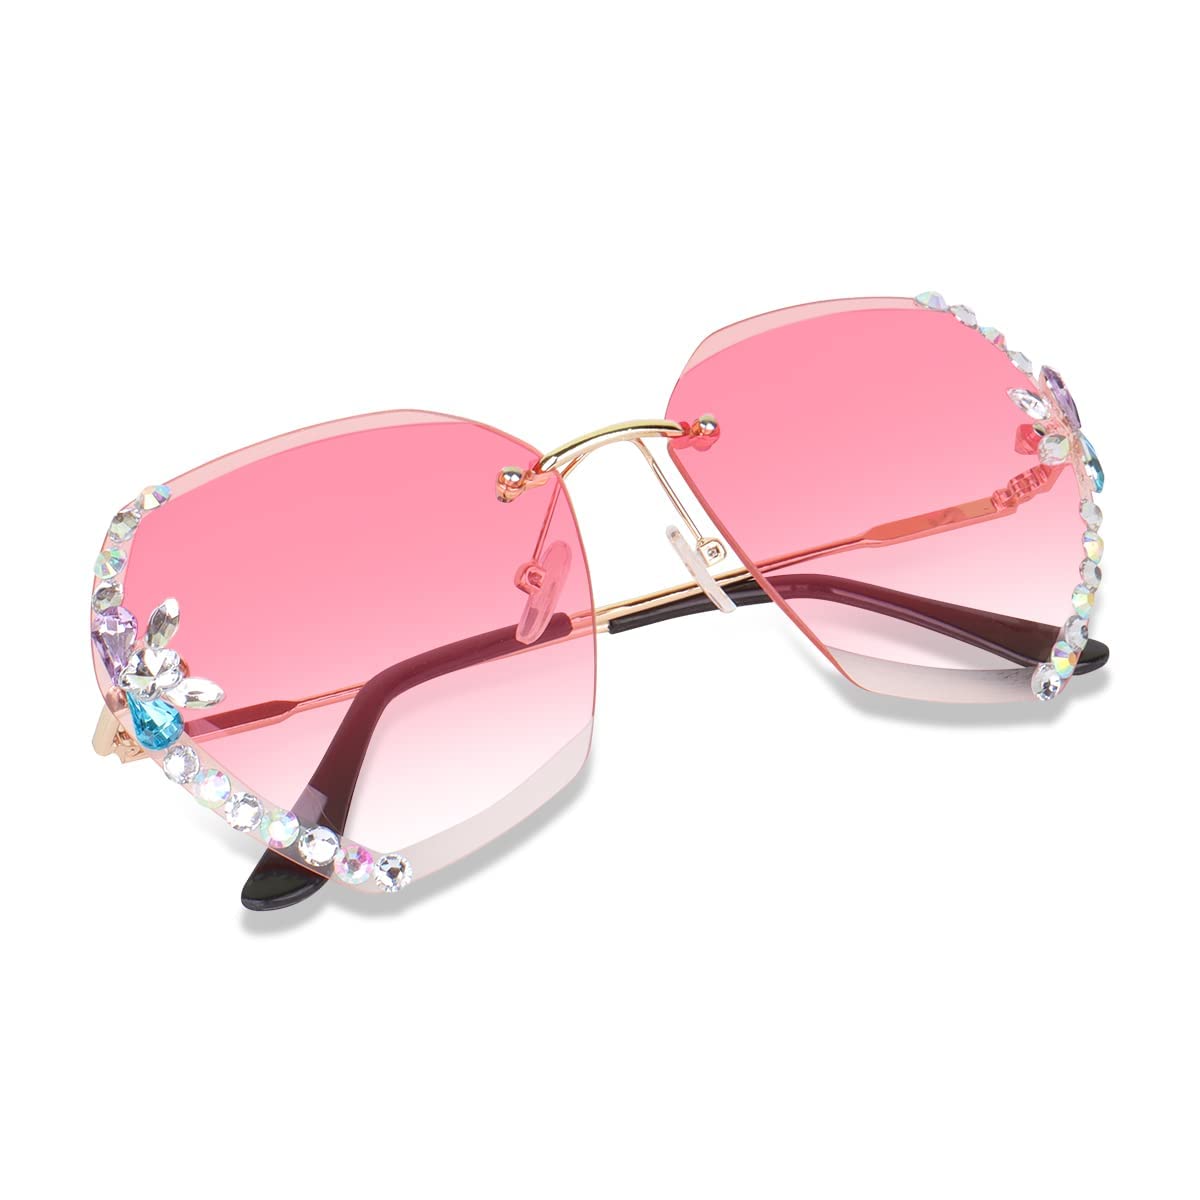 BLACK JONES UV400 Protective Sunglasses for Women Stylish with Glasses Cloth, Rimless Diamond Cutting Lens with Stone All color of Sunglasses for Driving Shades for Women. (Pink) 